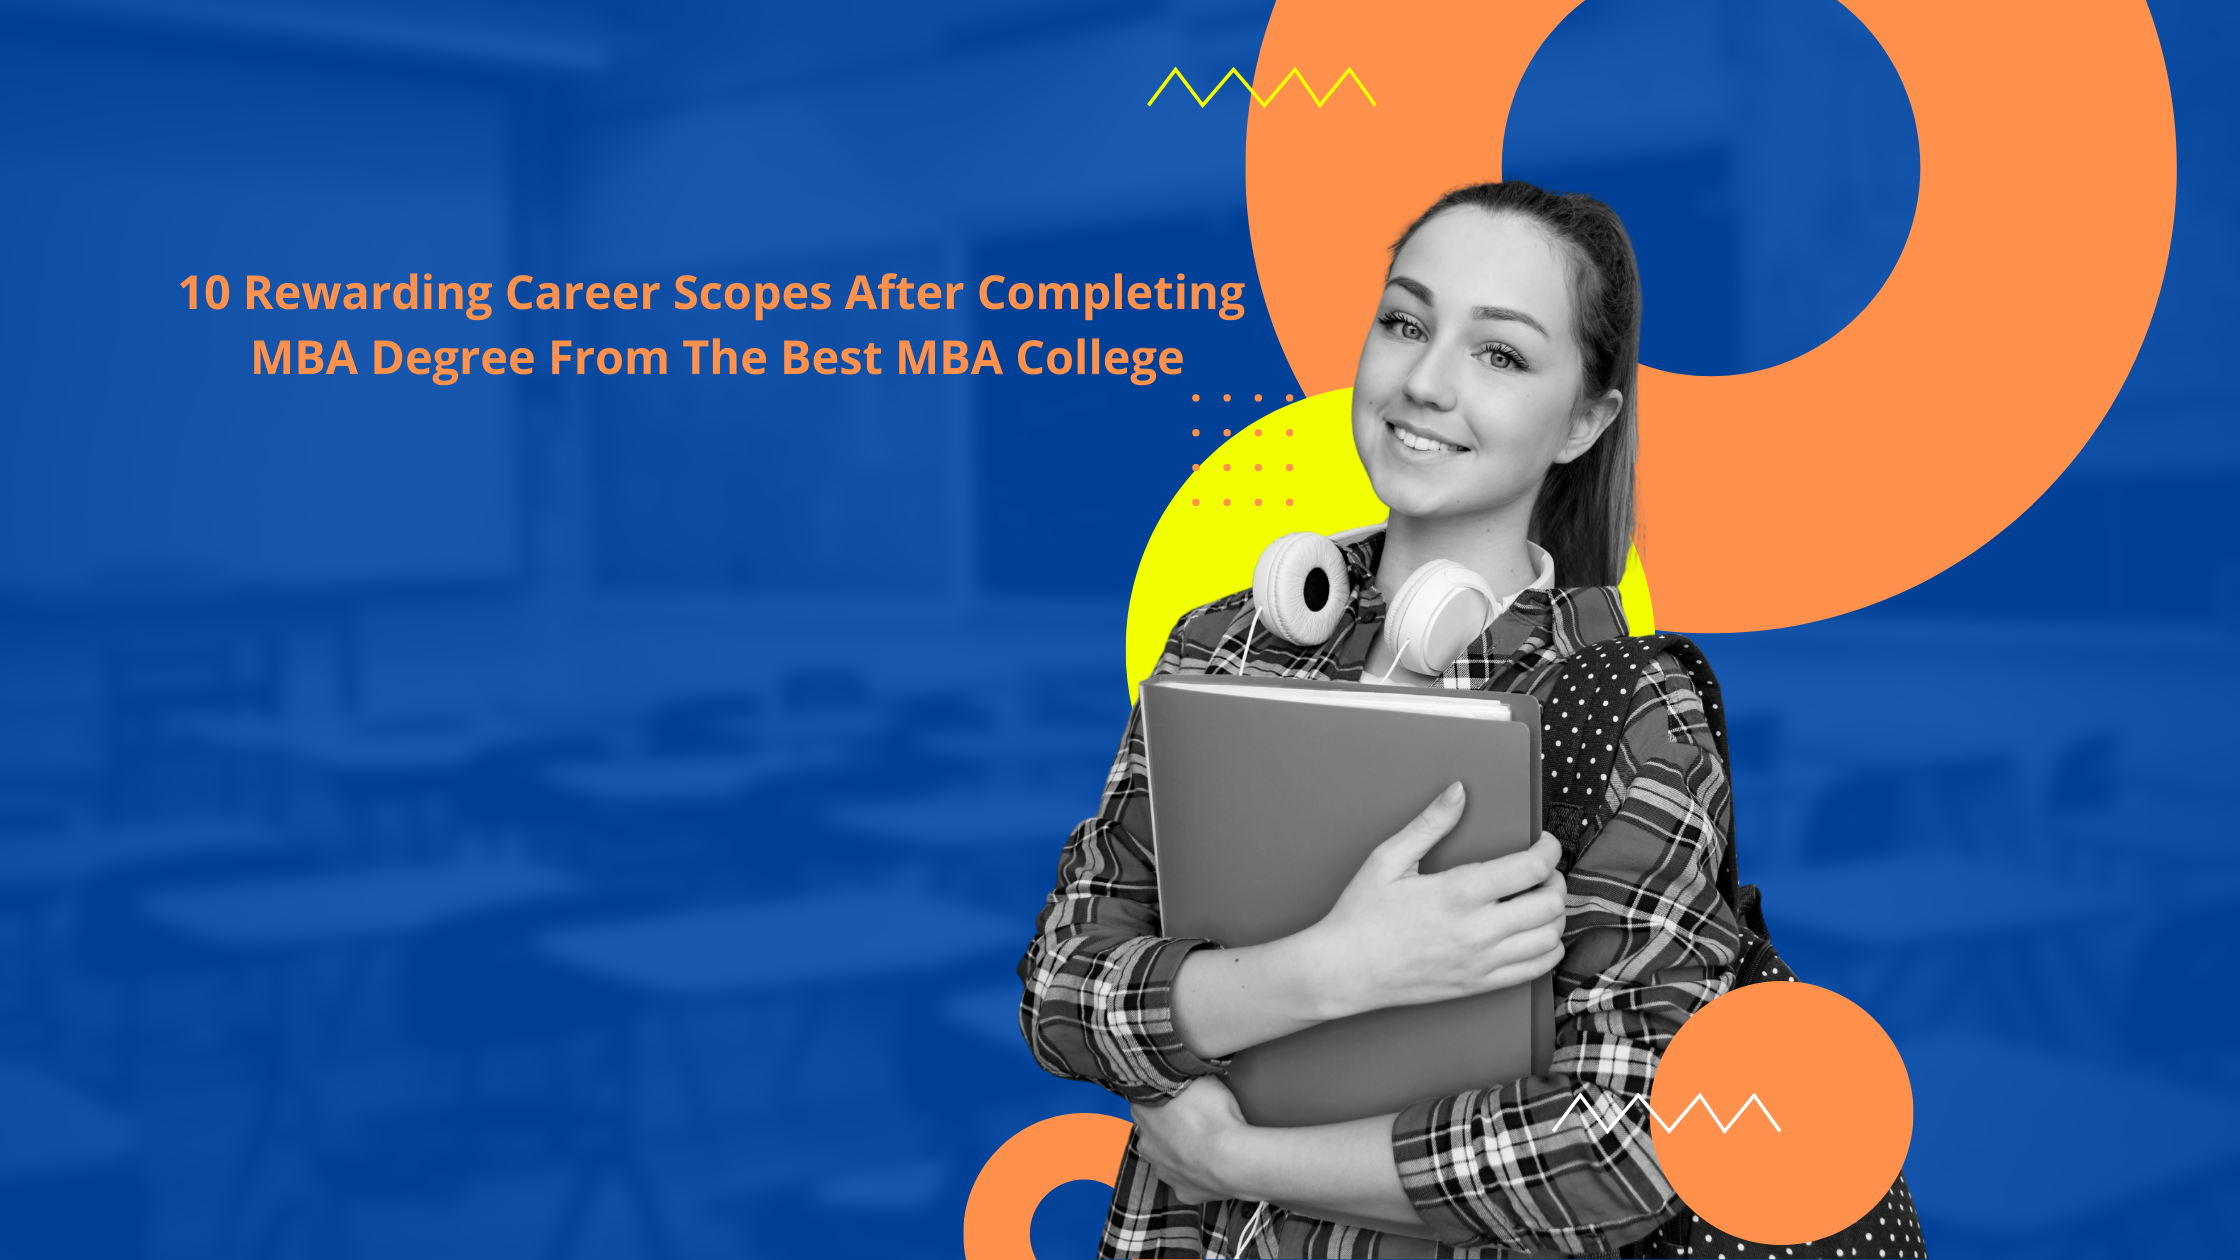 10 Rewarding Career Scopes After Completing MBA Degree From The Best MBA College